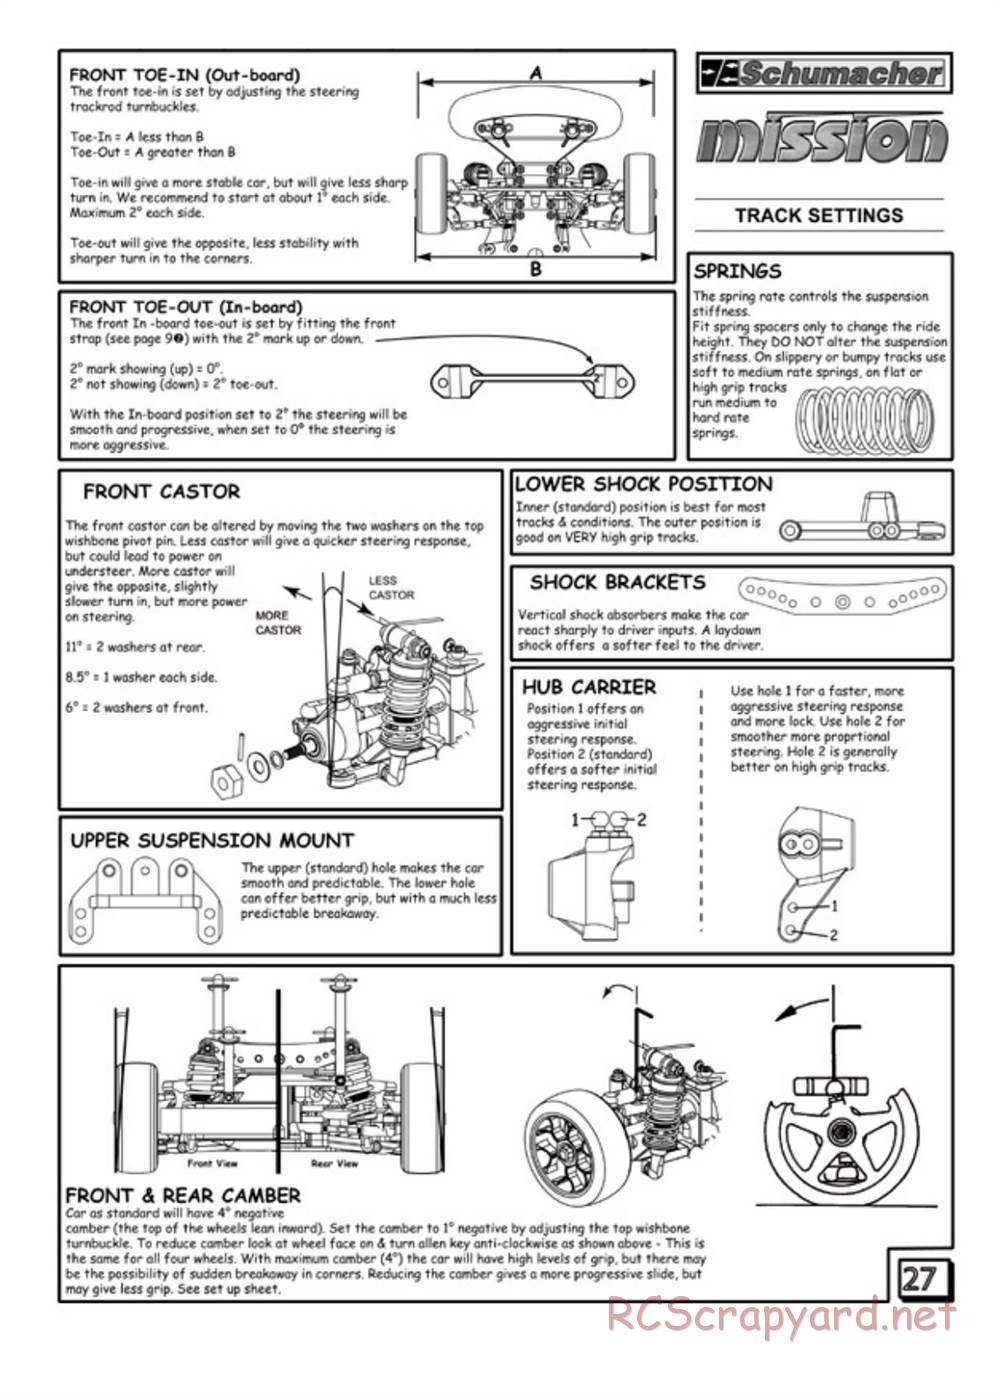 Schumacher - Mission - Manual - Page 27